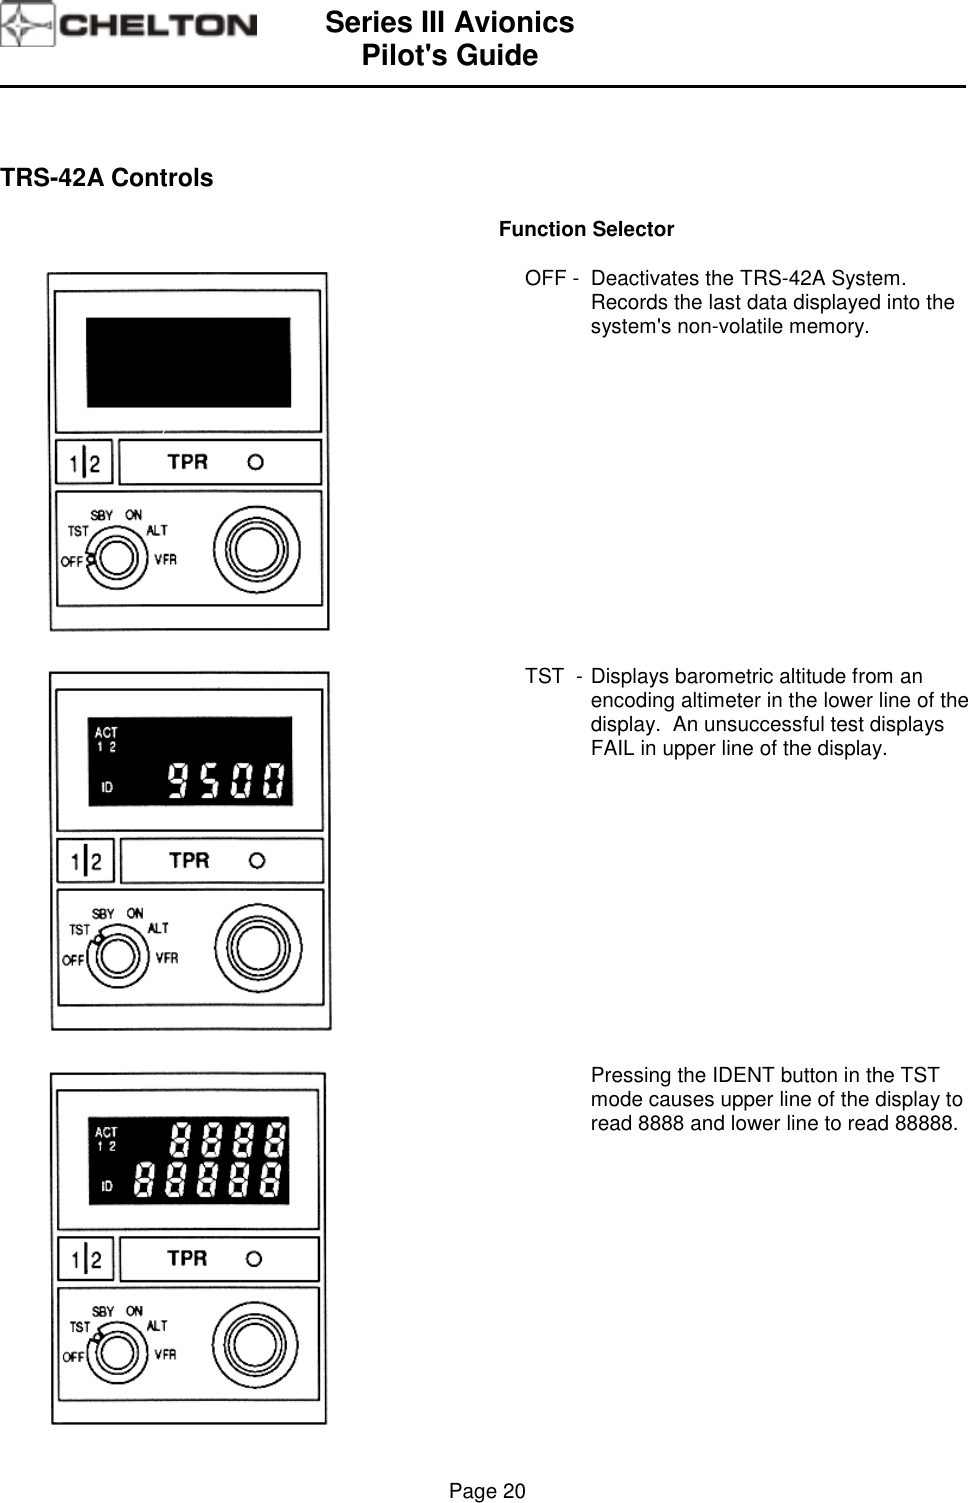 Series III AvionicsPilot&apos;s Guide                                                                                                                                          Page 20TRS-42A ControlsFunction SelectorOFF - Deactivates the TRS-42A System.Records the last data displayed into thesystem&apos;s non-volatile memory.TST  - Displays barometric altitude from anencoding altimeter in the lower line of thedisplay.  An unsuccessful test displaysFAIL in upper line of the display.Pressing the IDENT button in the TSTmode causes upper line of the display toread 8888 and lower line to read 88888.